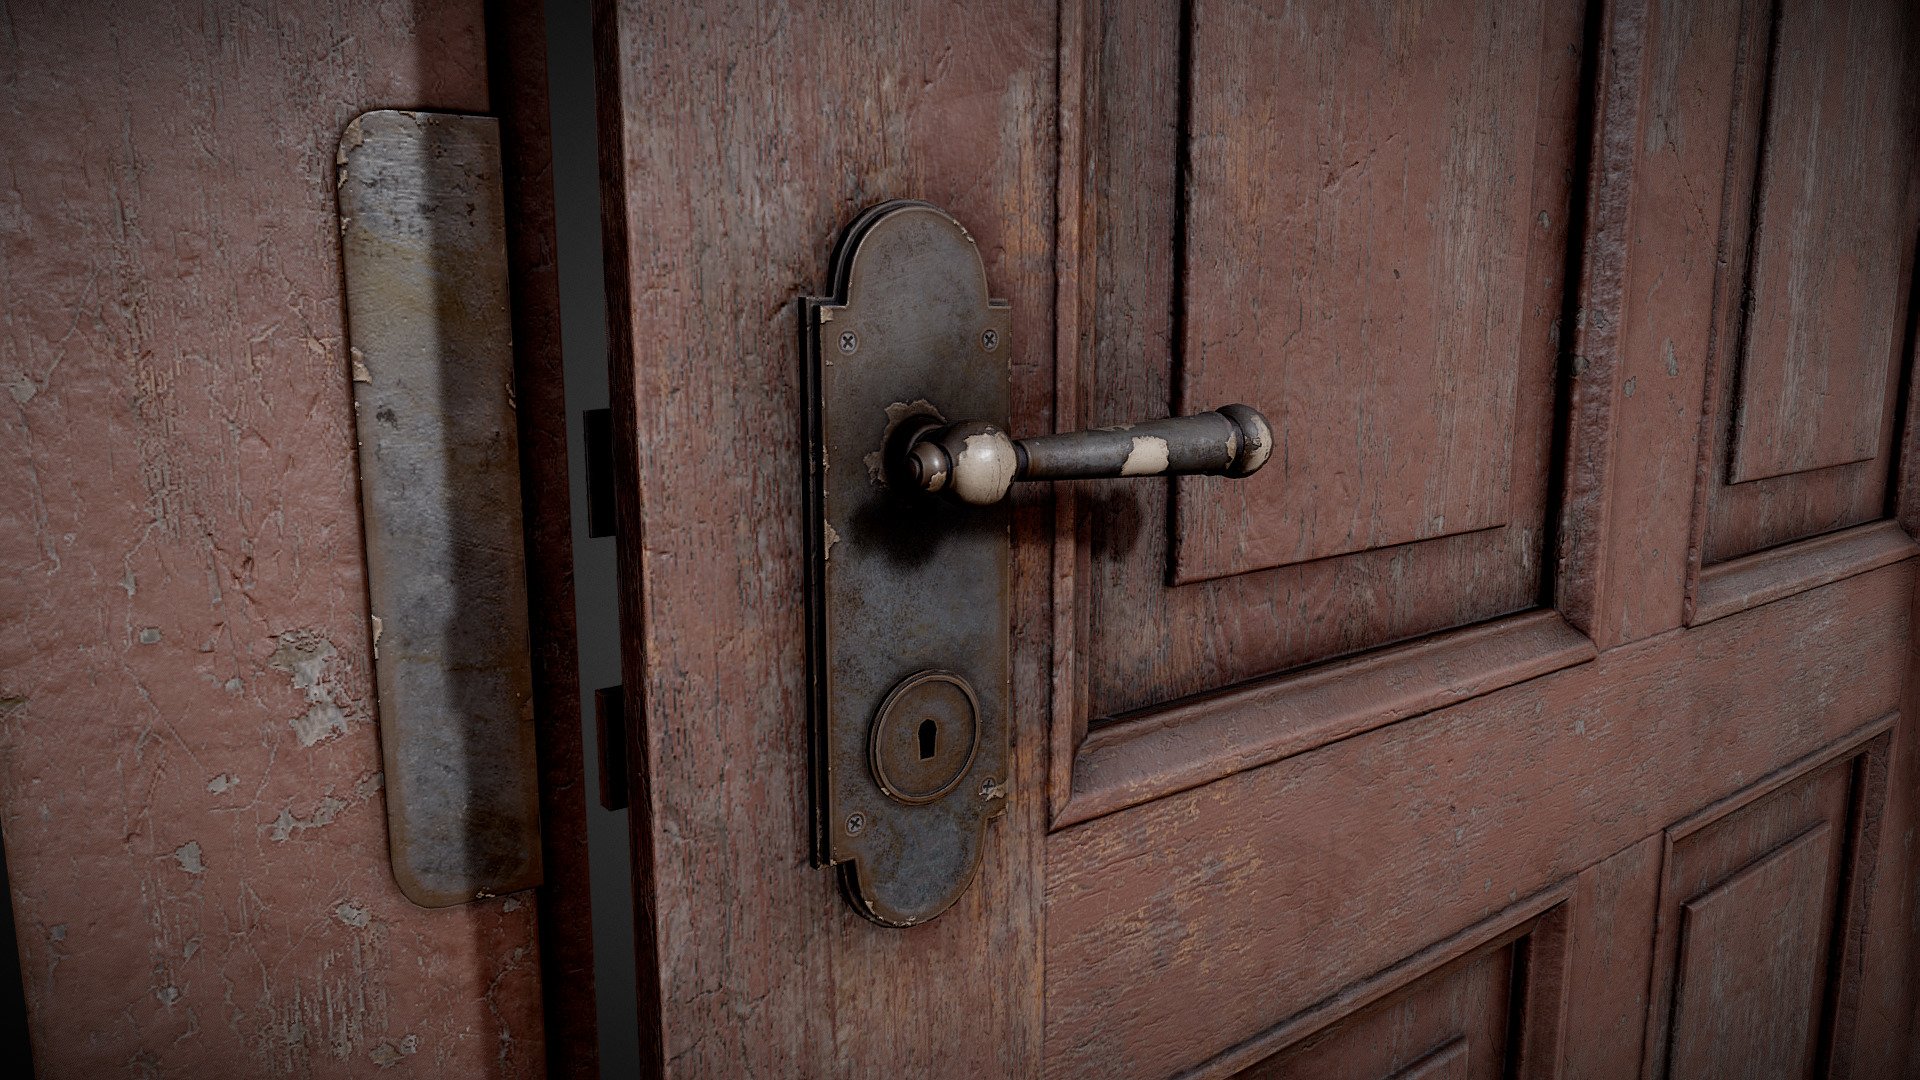 Old Door for my Horror Bedroom Pack. It is included in my Horror Bedroom Asset Pack for UE5.

For more of my work you can look here

Important/Additional Notes: If you encounter problems or have further questions or suggestions you can drop me an email at timgames52@gmail.com or write me a message at Artstation

Technical Details

Texture Sizes:


All Textures are 4096x4096

Vertex Count Combined:  3395 (6334 - Tris)

Format: fbx

LODs included: No

Number of Meshes: 7

Number of Textures: 10

Artstation Post with more images: Link - Old Door - (Horror Bedroom) - Buy Royalty Free 3D model by Tim H. (@eueruntergang) 3d model